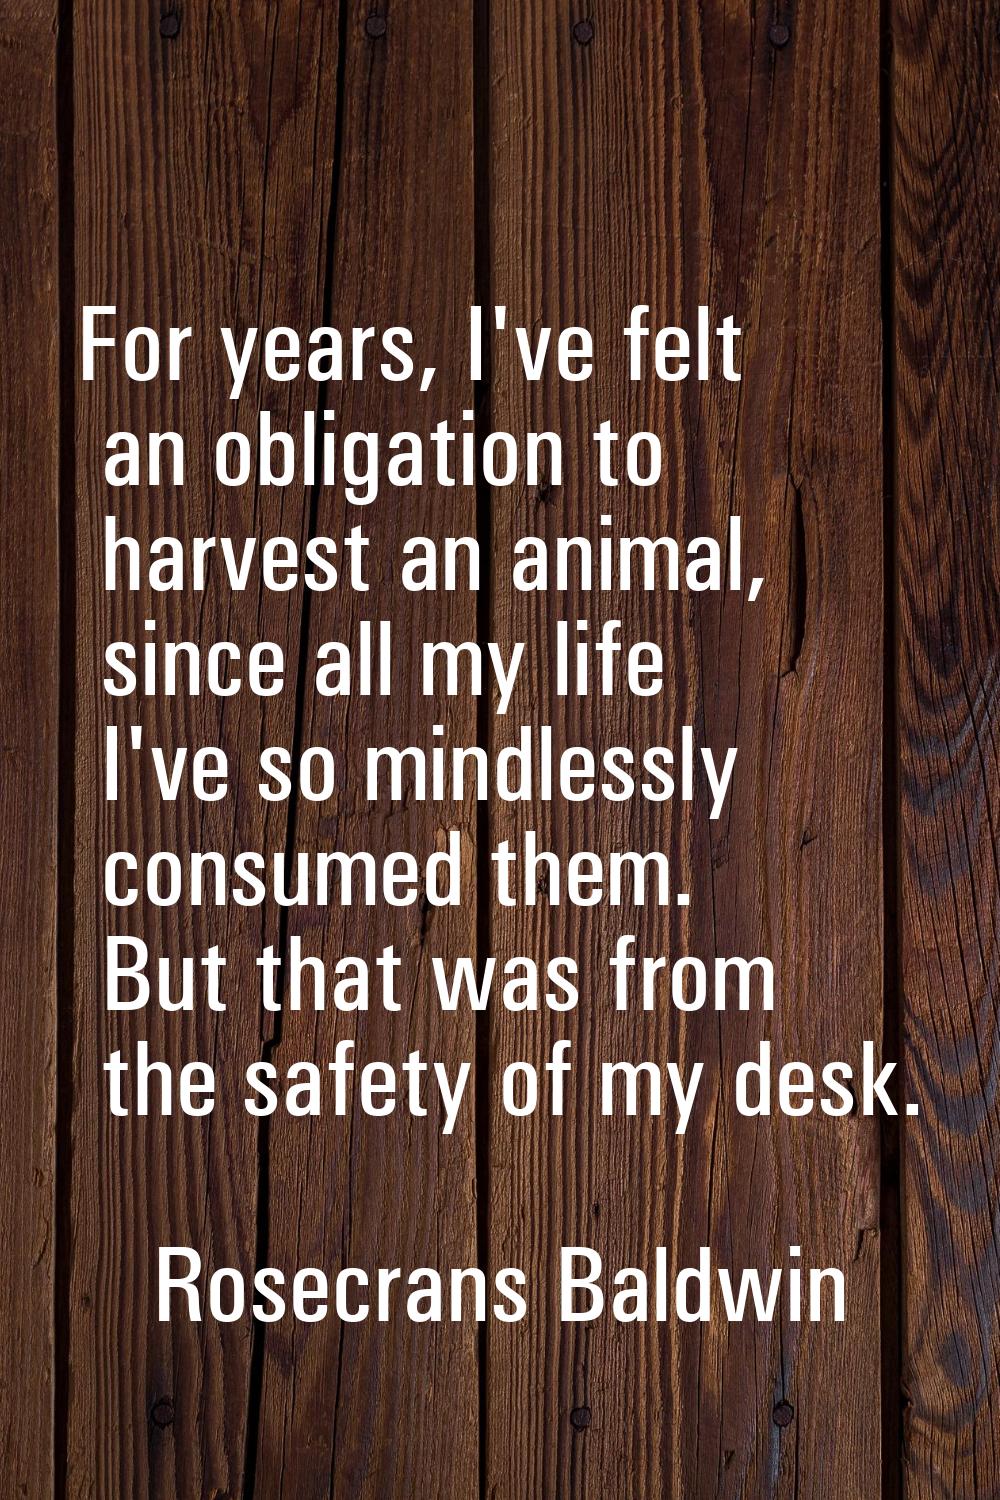 For years, I've felt an obligation to harvest an animal, since all my life I've so mindlessly consu